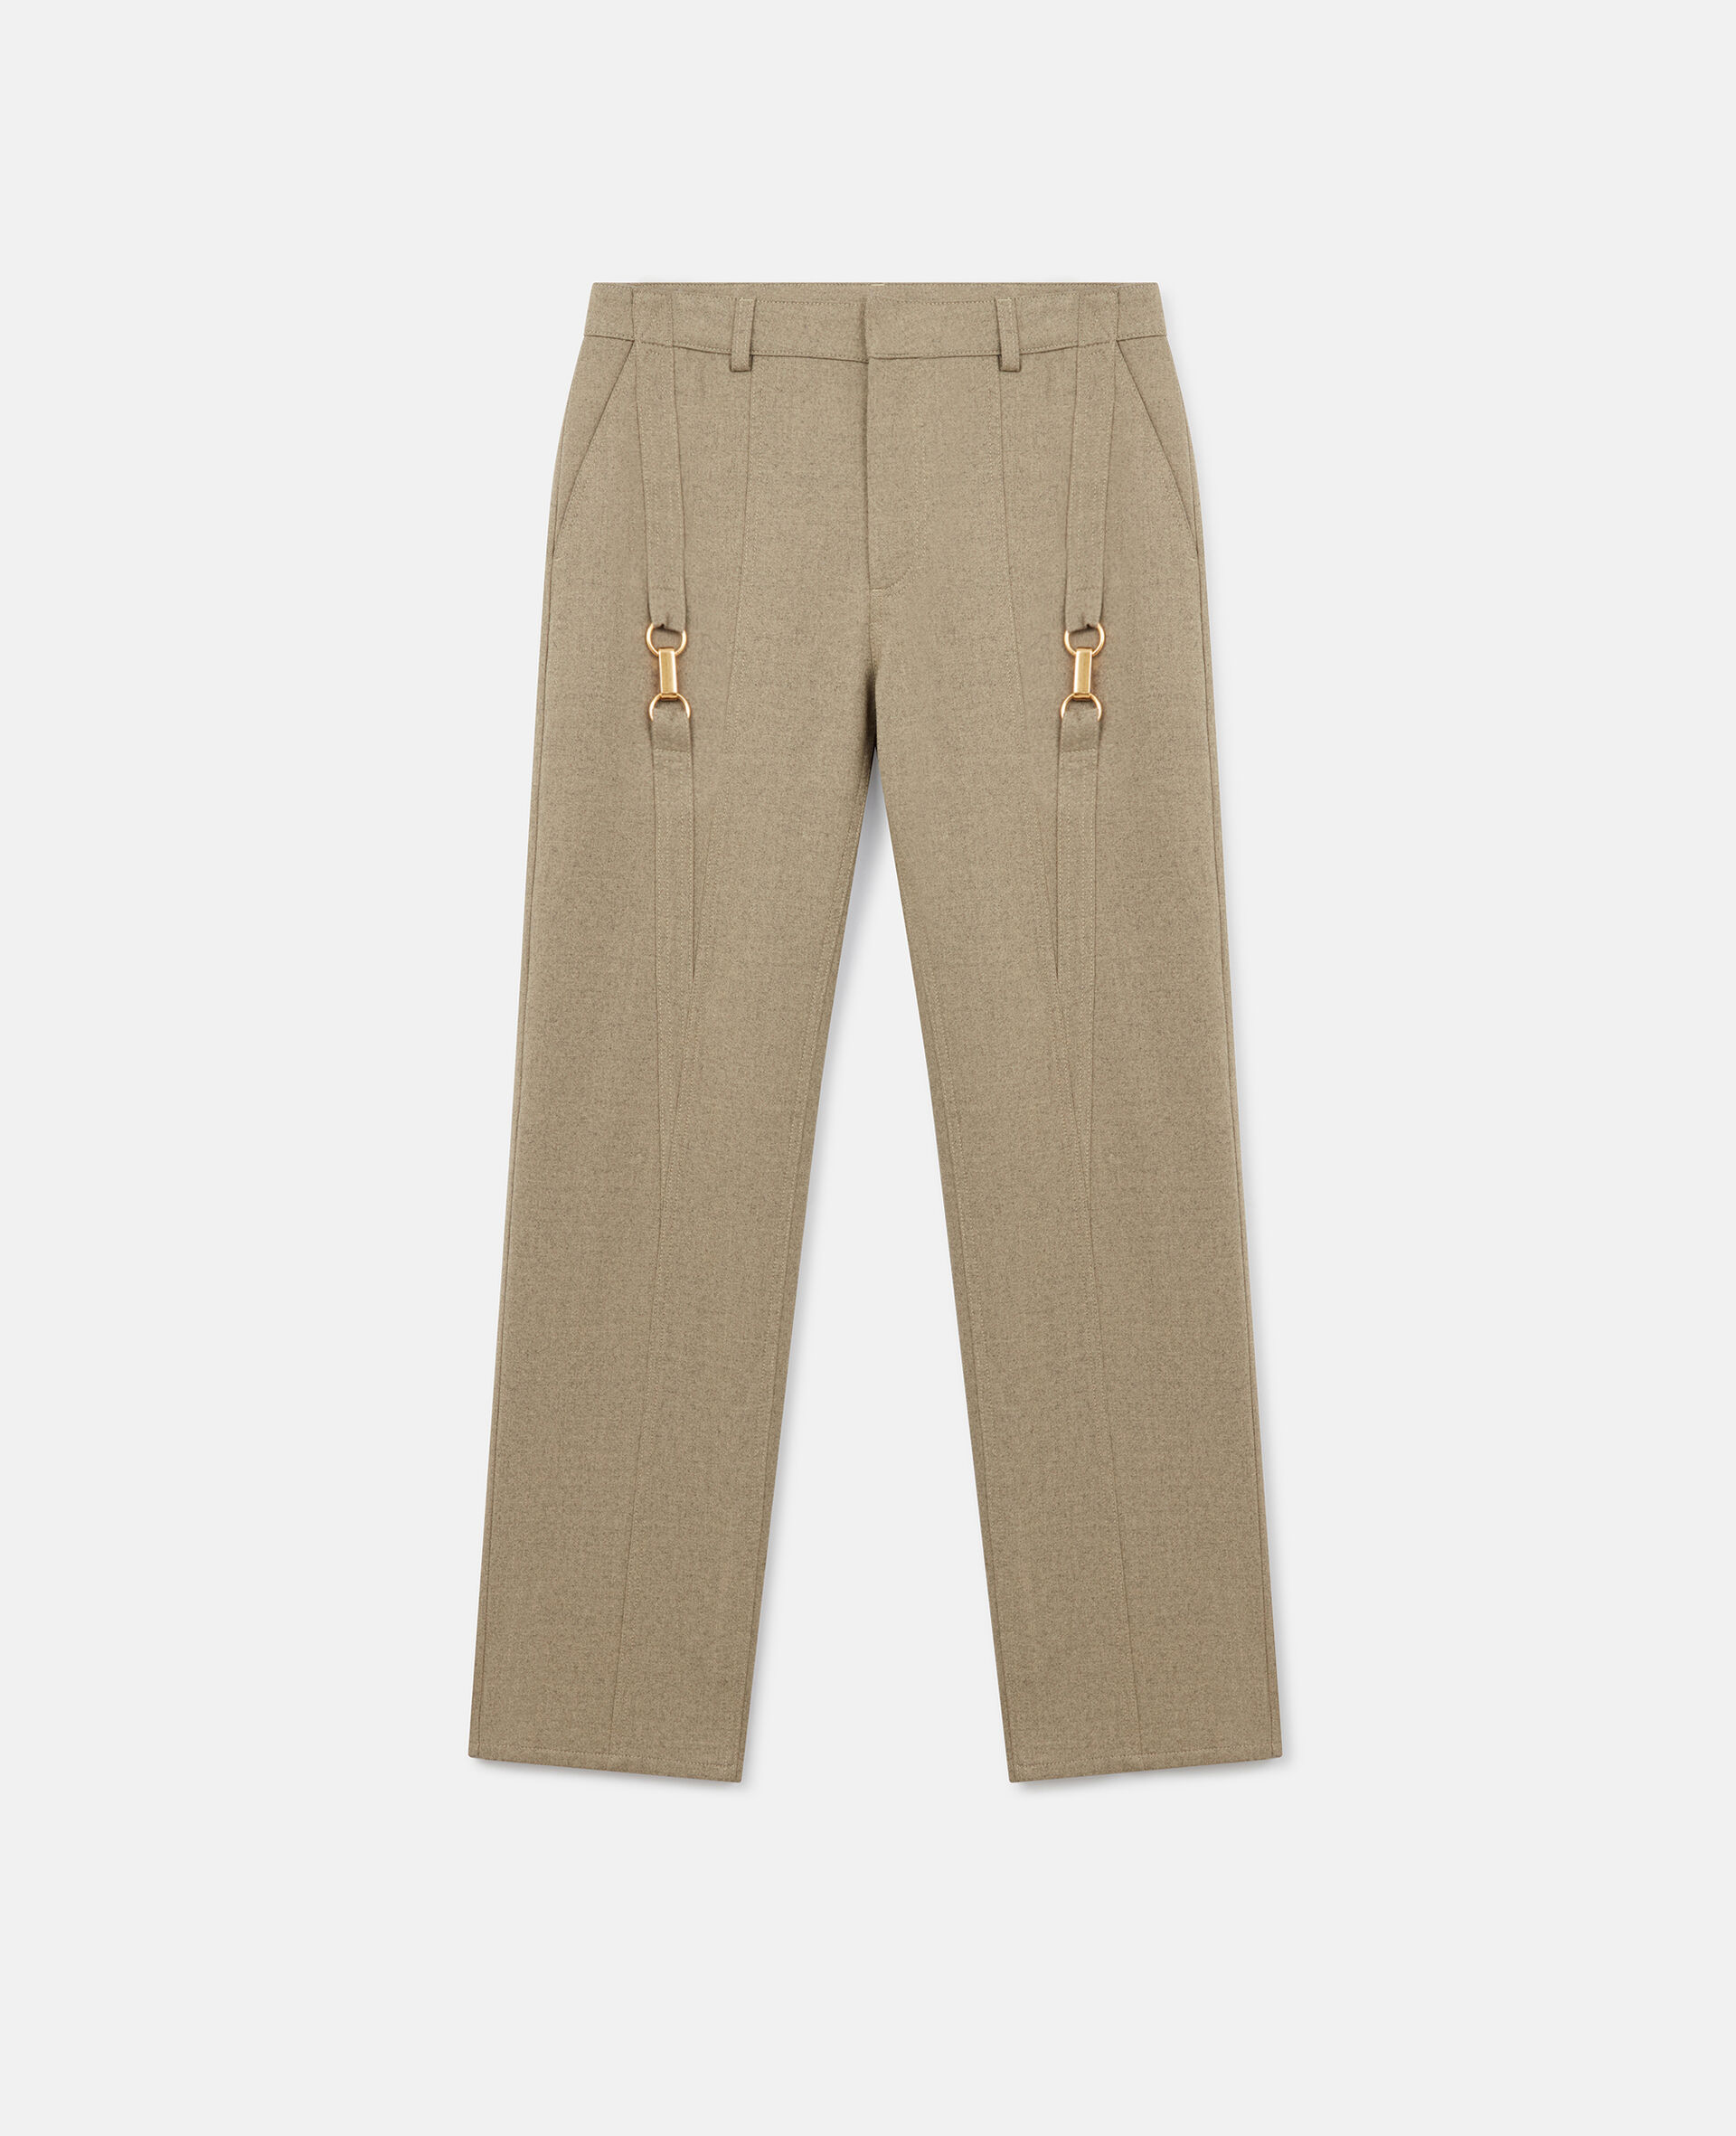 Clasp-Embellished Mid-Rise Wool Pants-Beige-large image number 0